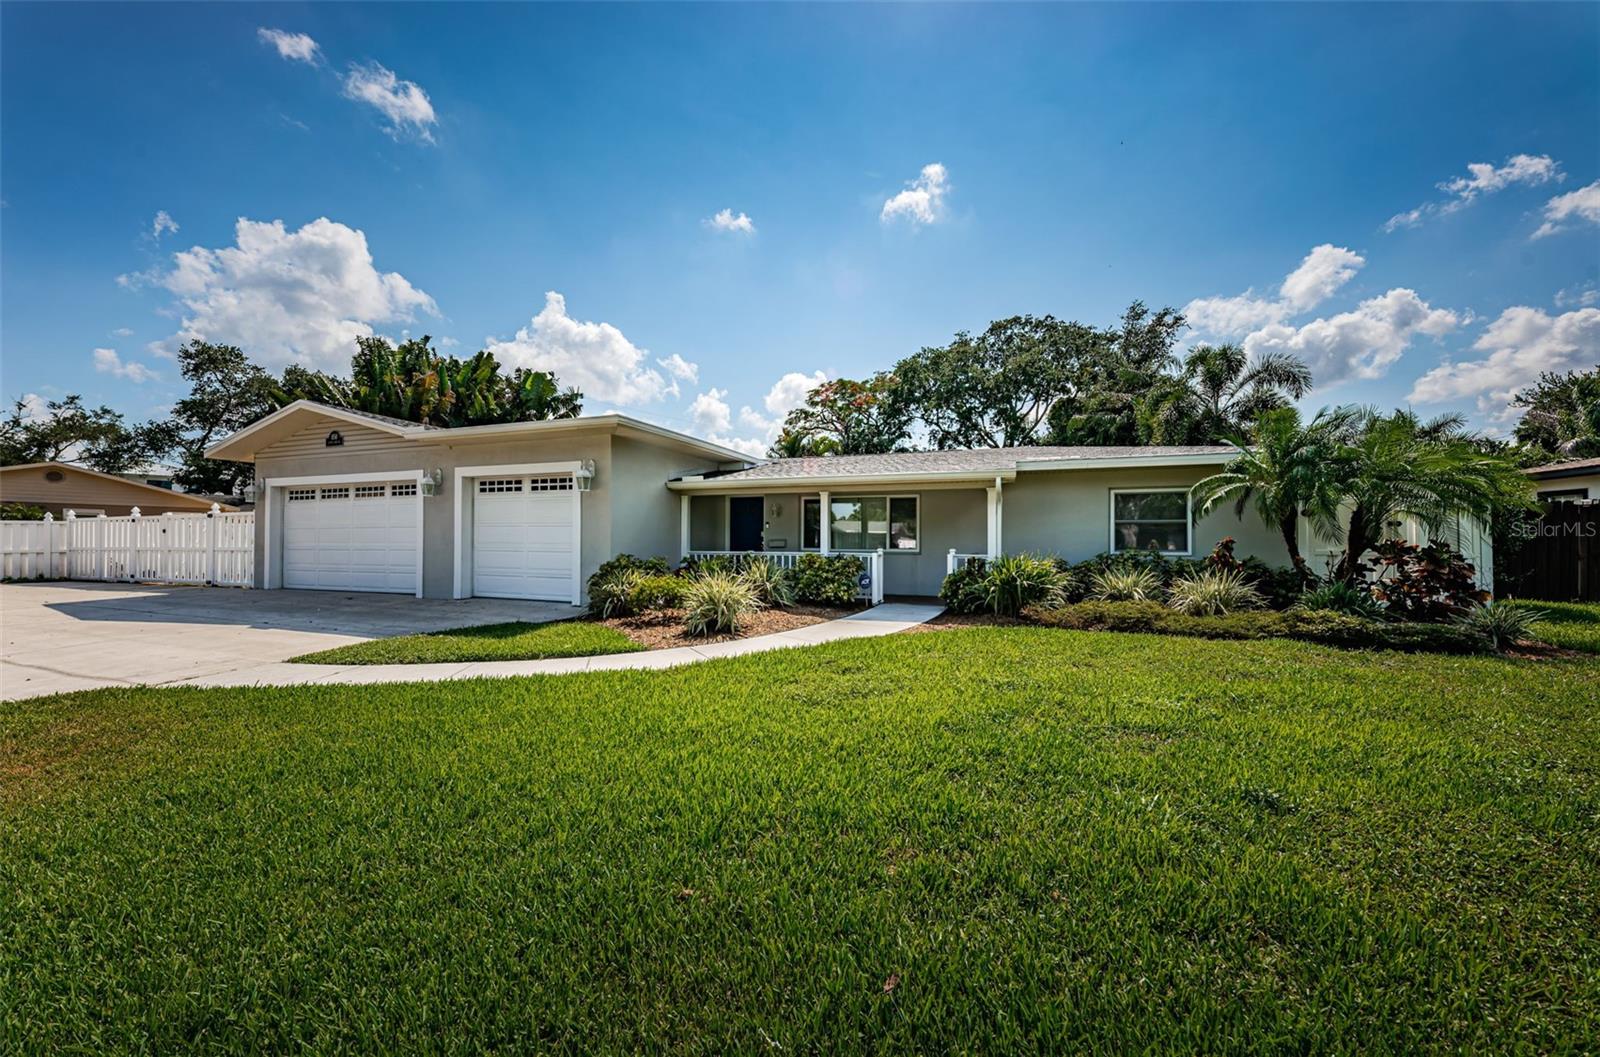 Welcome to 850 Rafael Blvd NE in the highly sought-after neighborhood of Snell Isle.